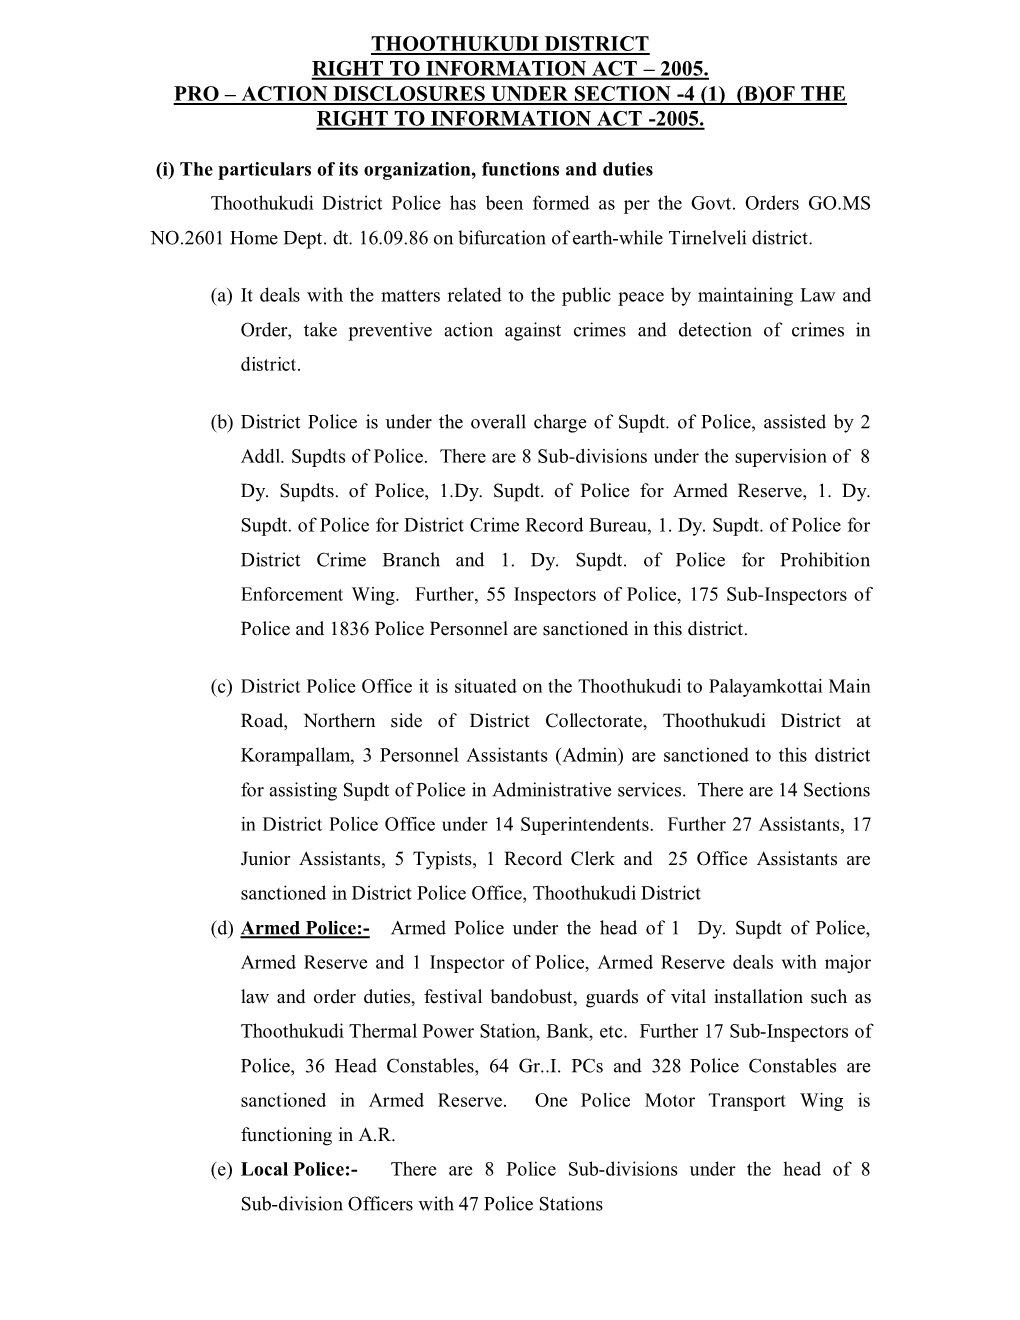 Thoothukudi District Right to Information Act – 2005